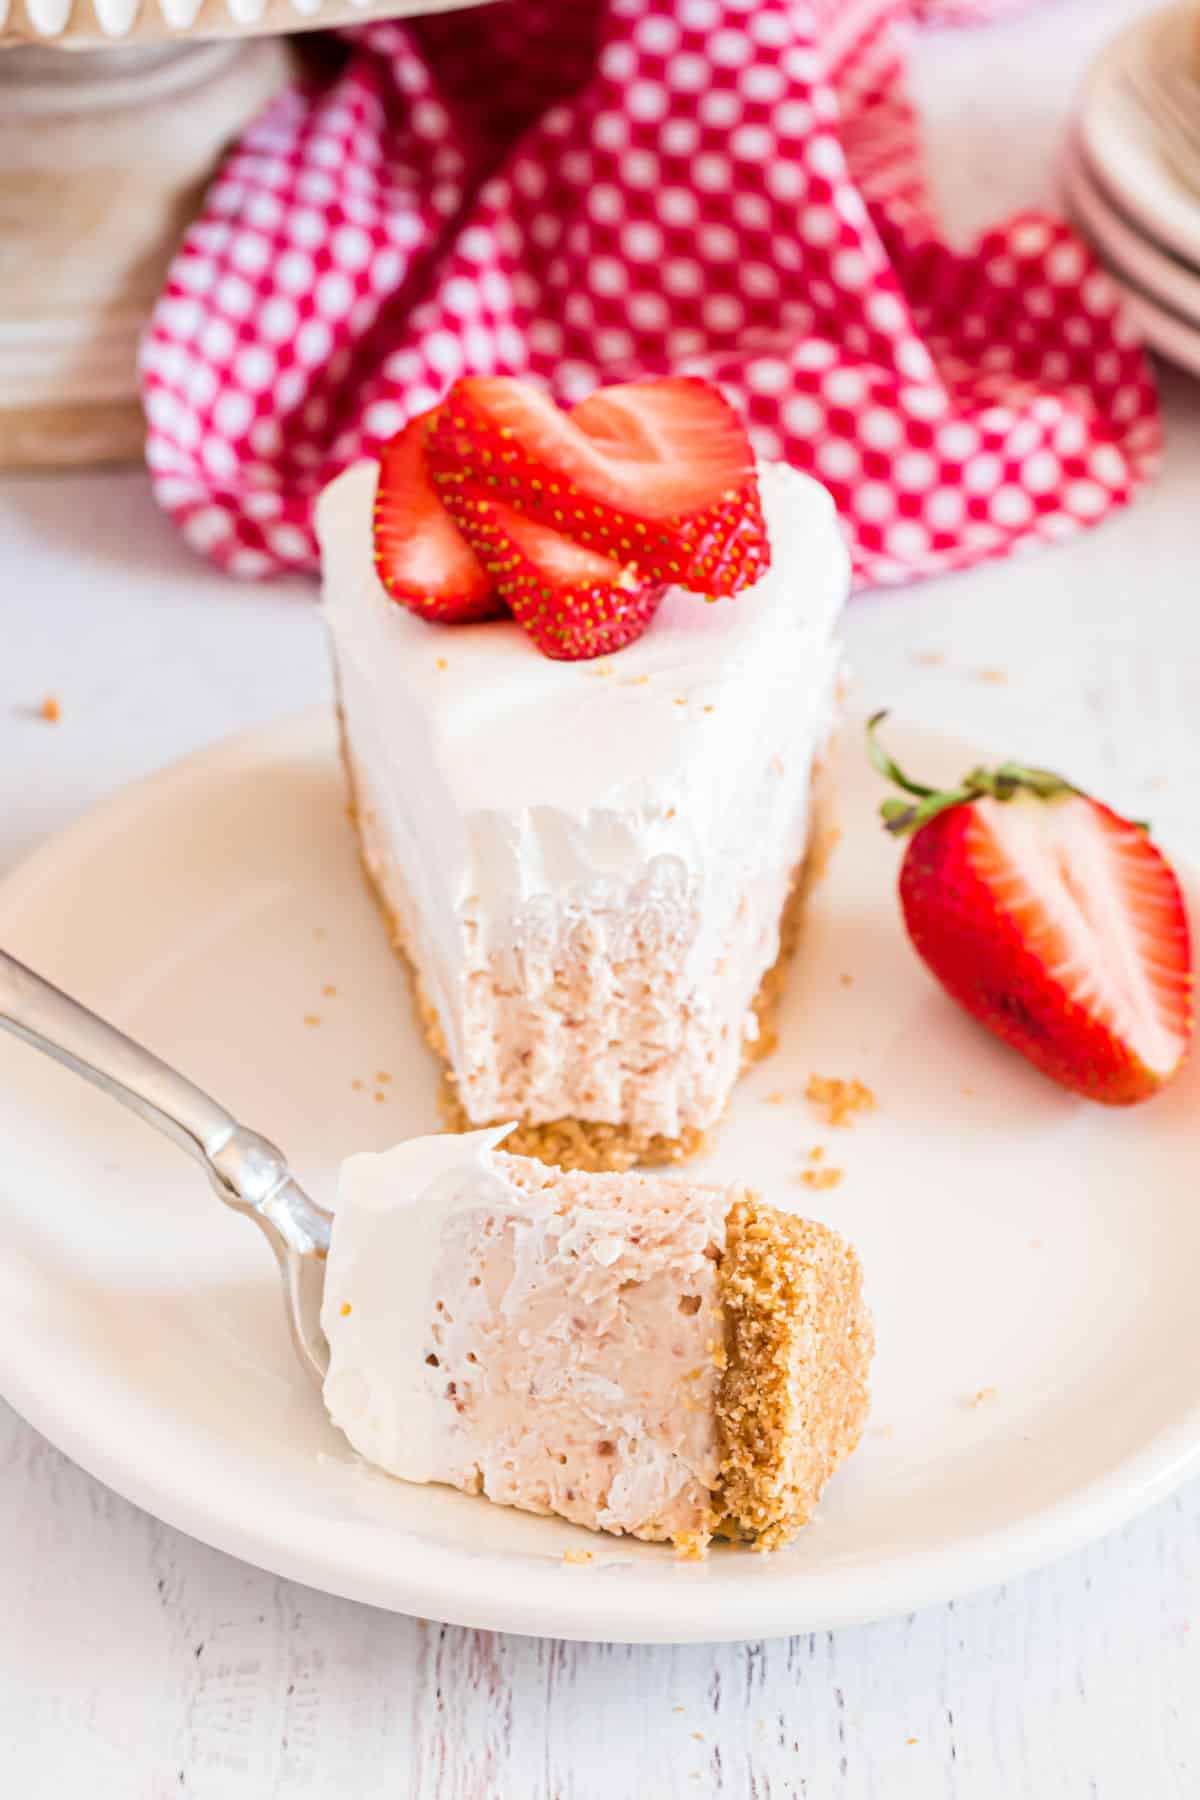 Slice of strawberry cheesecake with a bite taken.